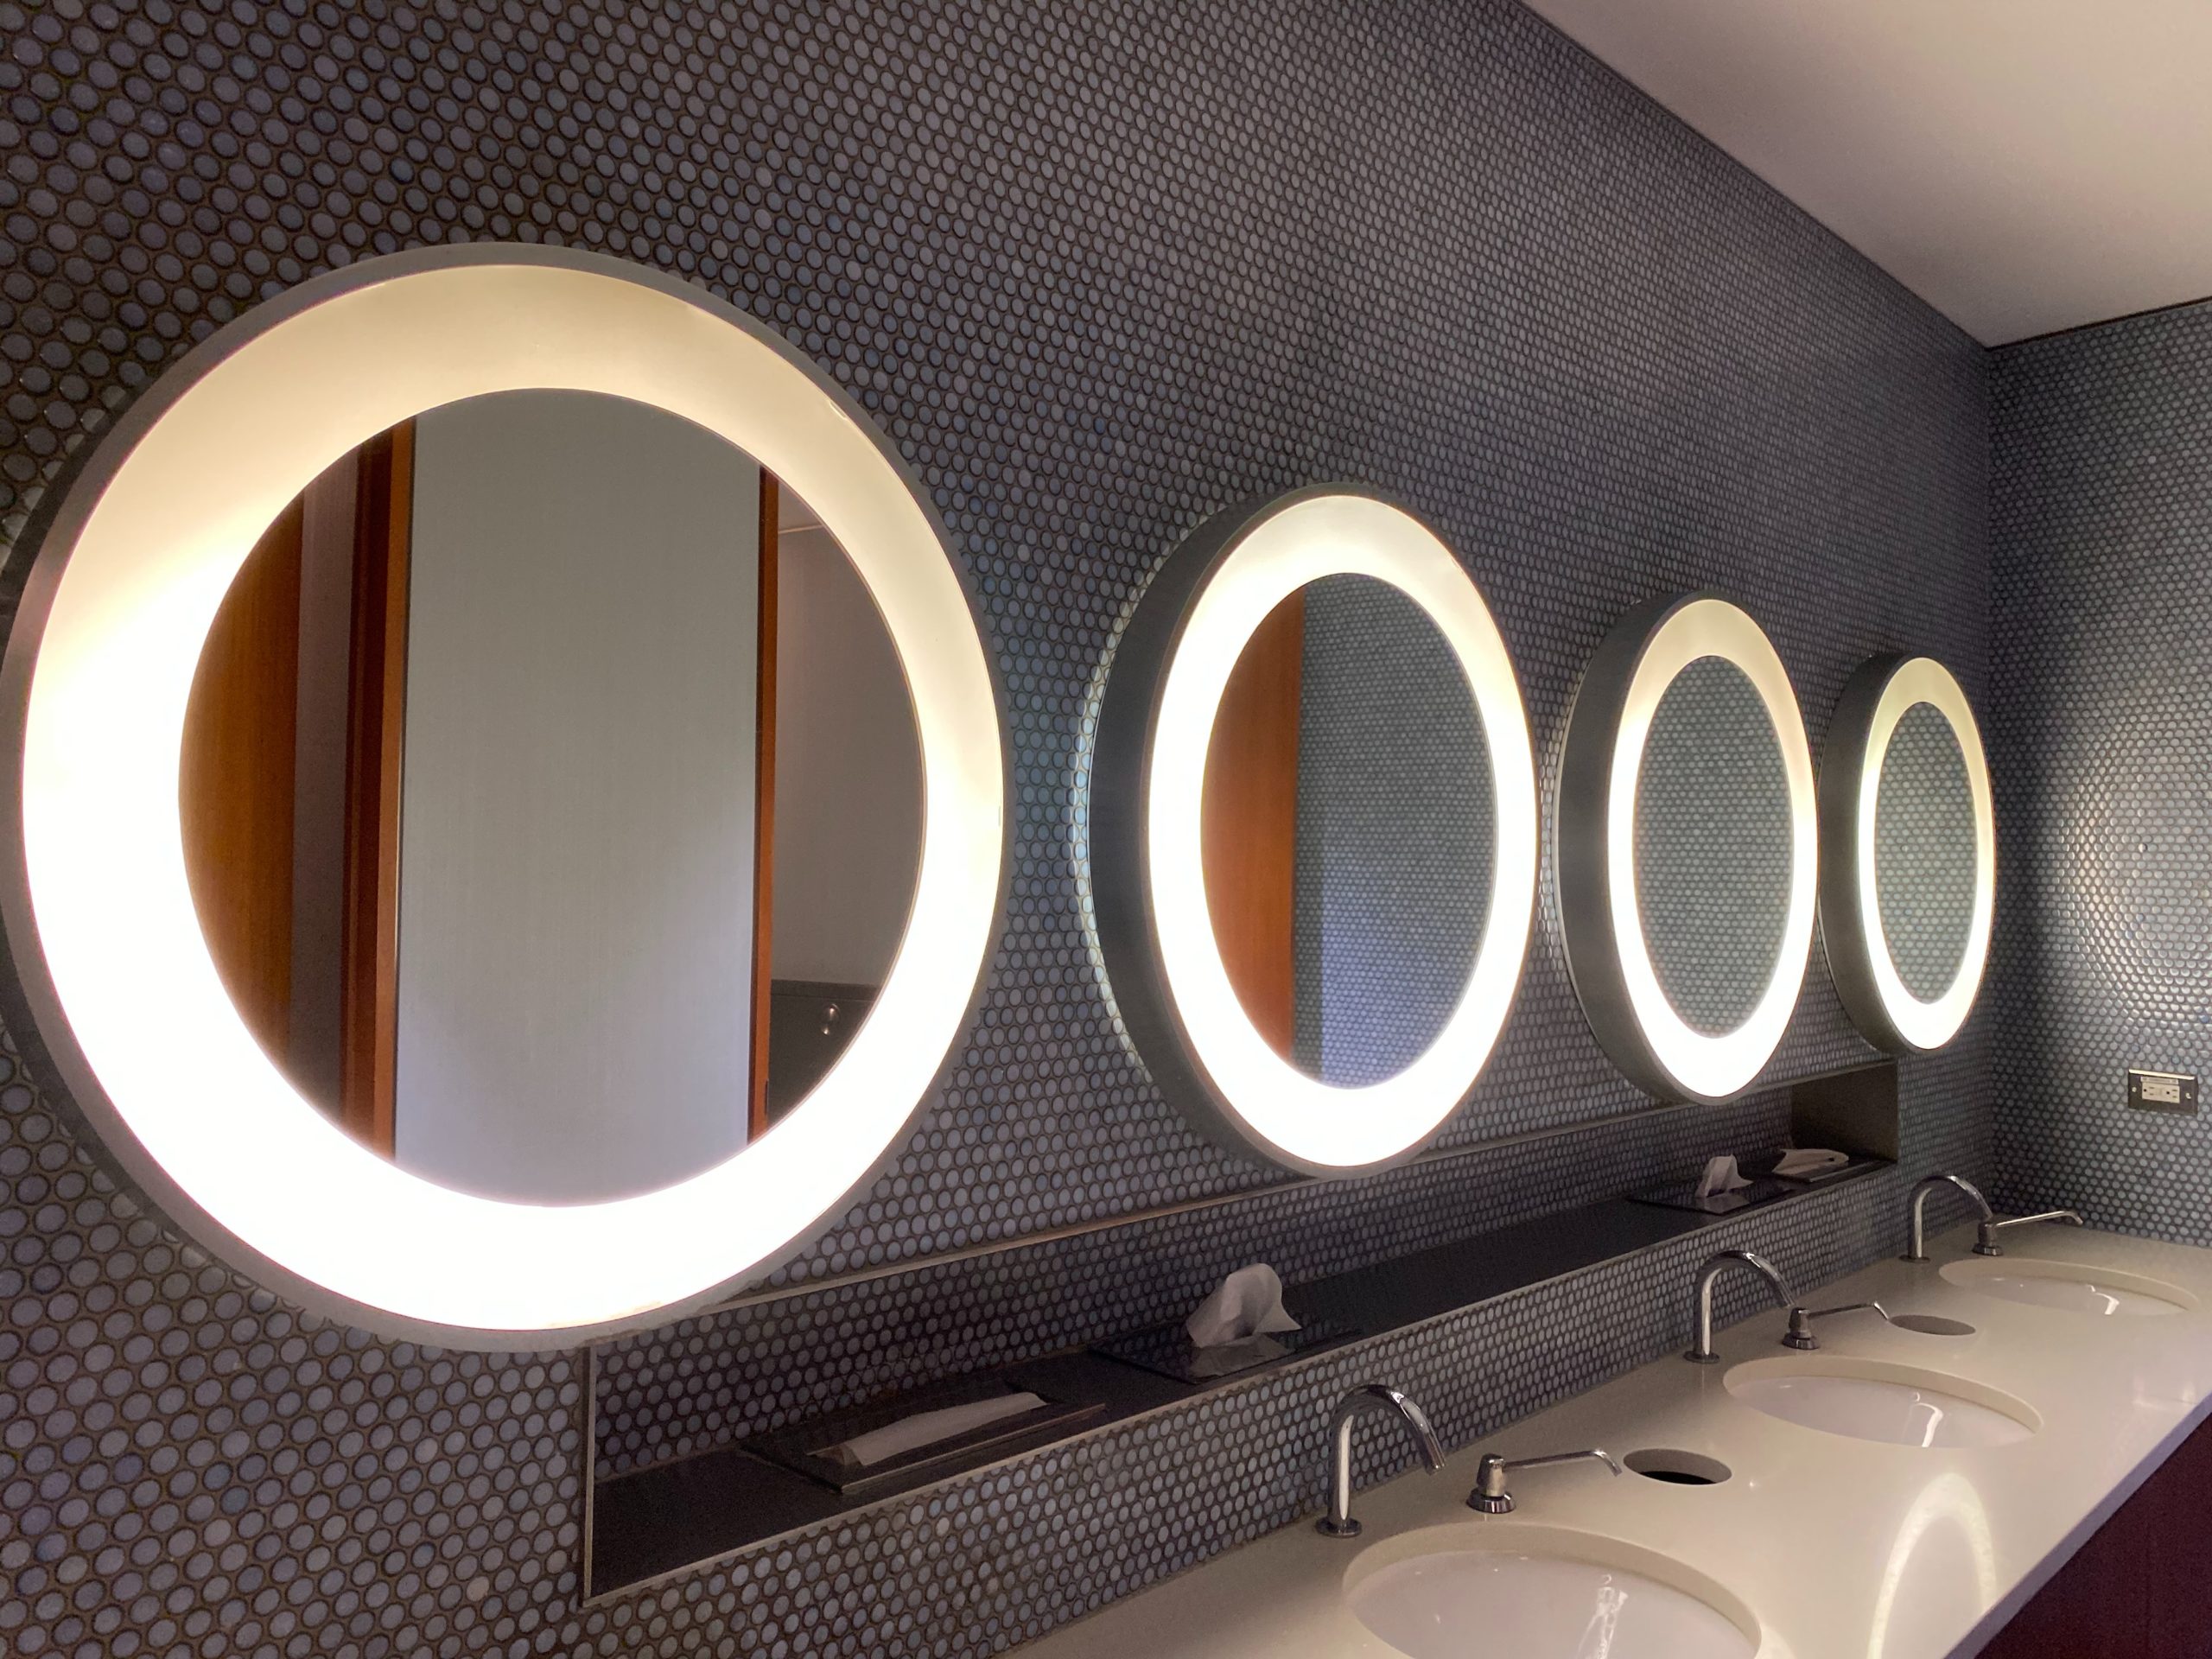 Mirrors in a bathroom, place over sinks